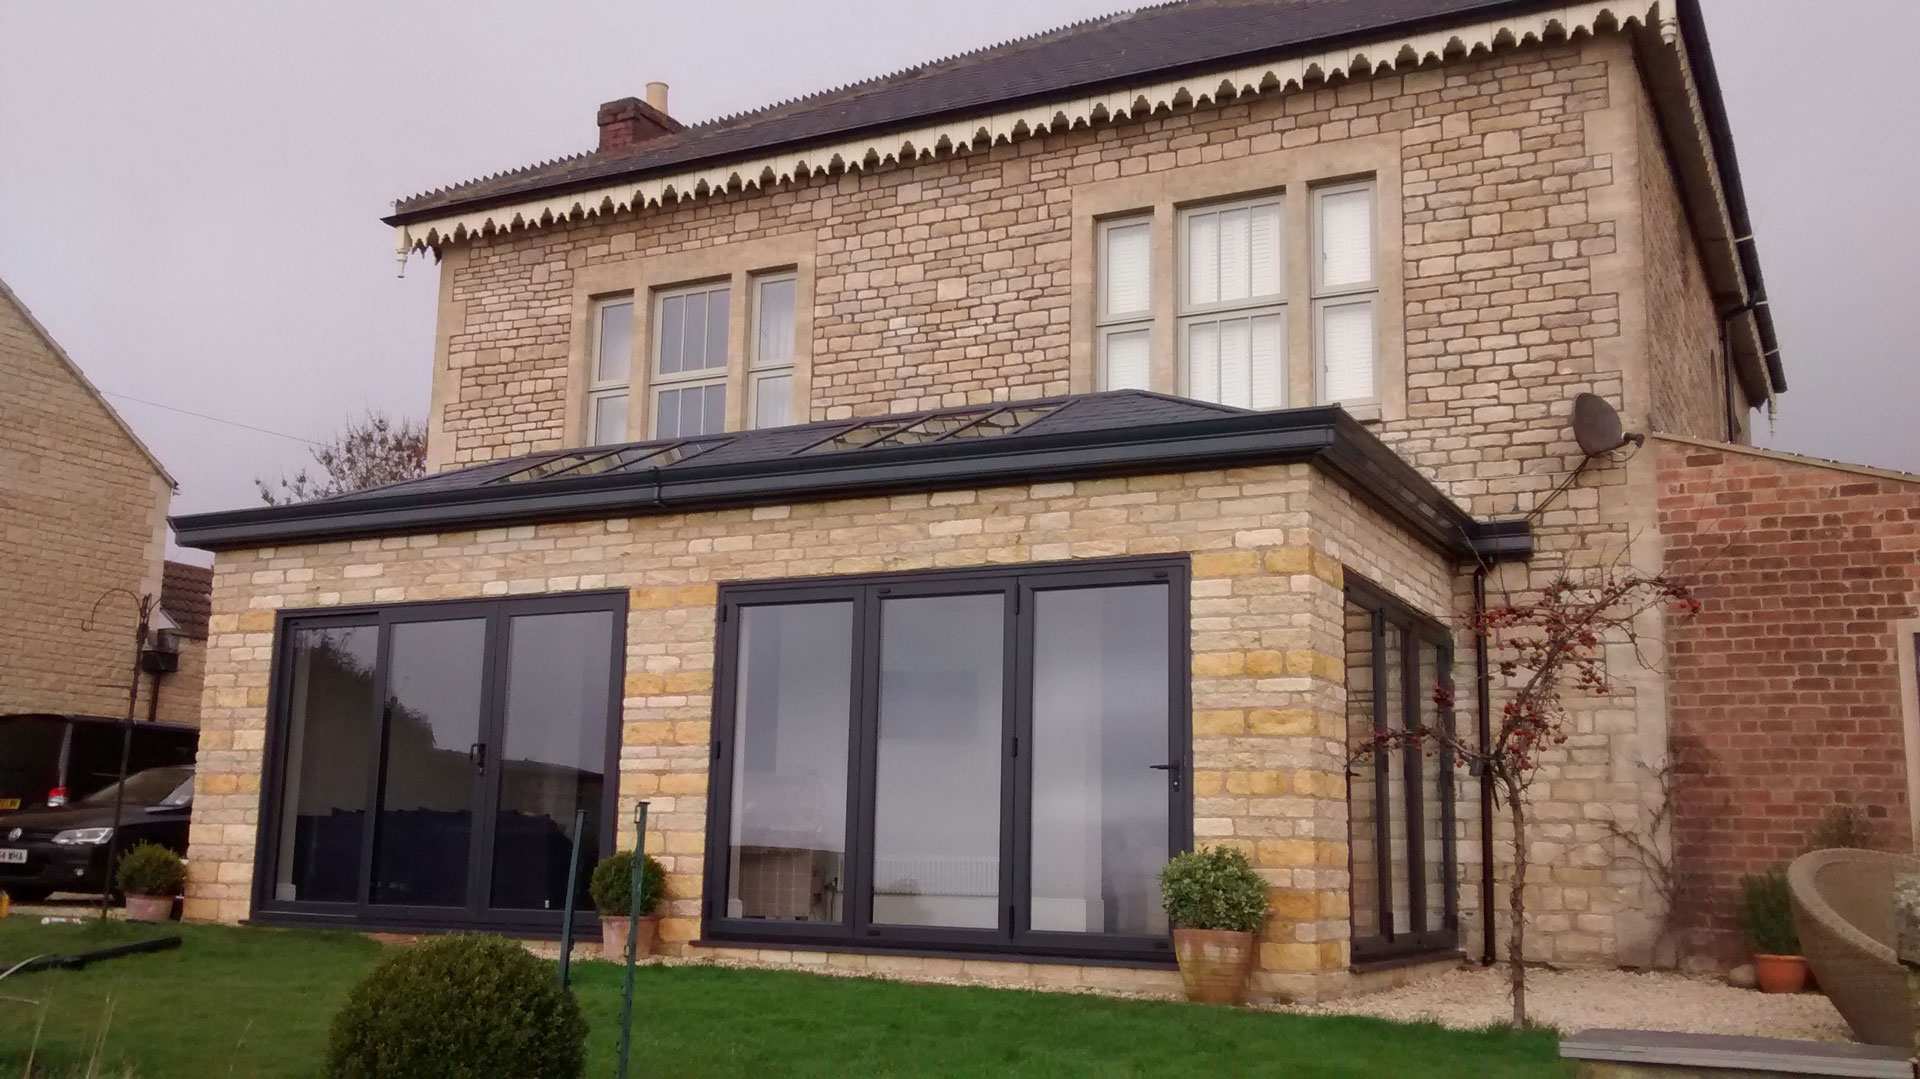 A complete guide to the best window companies of stratford upon avon